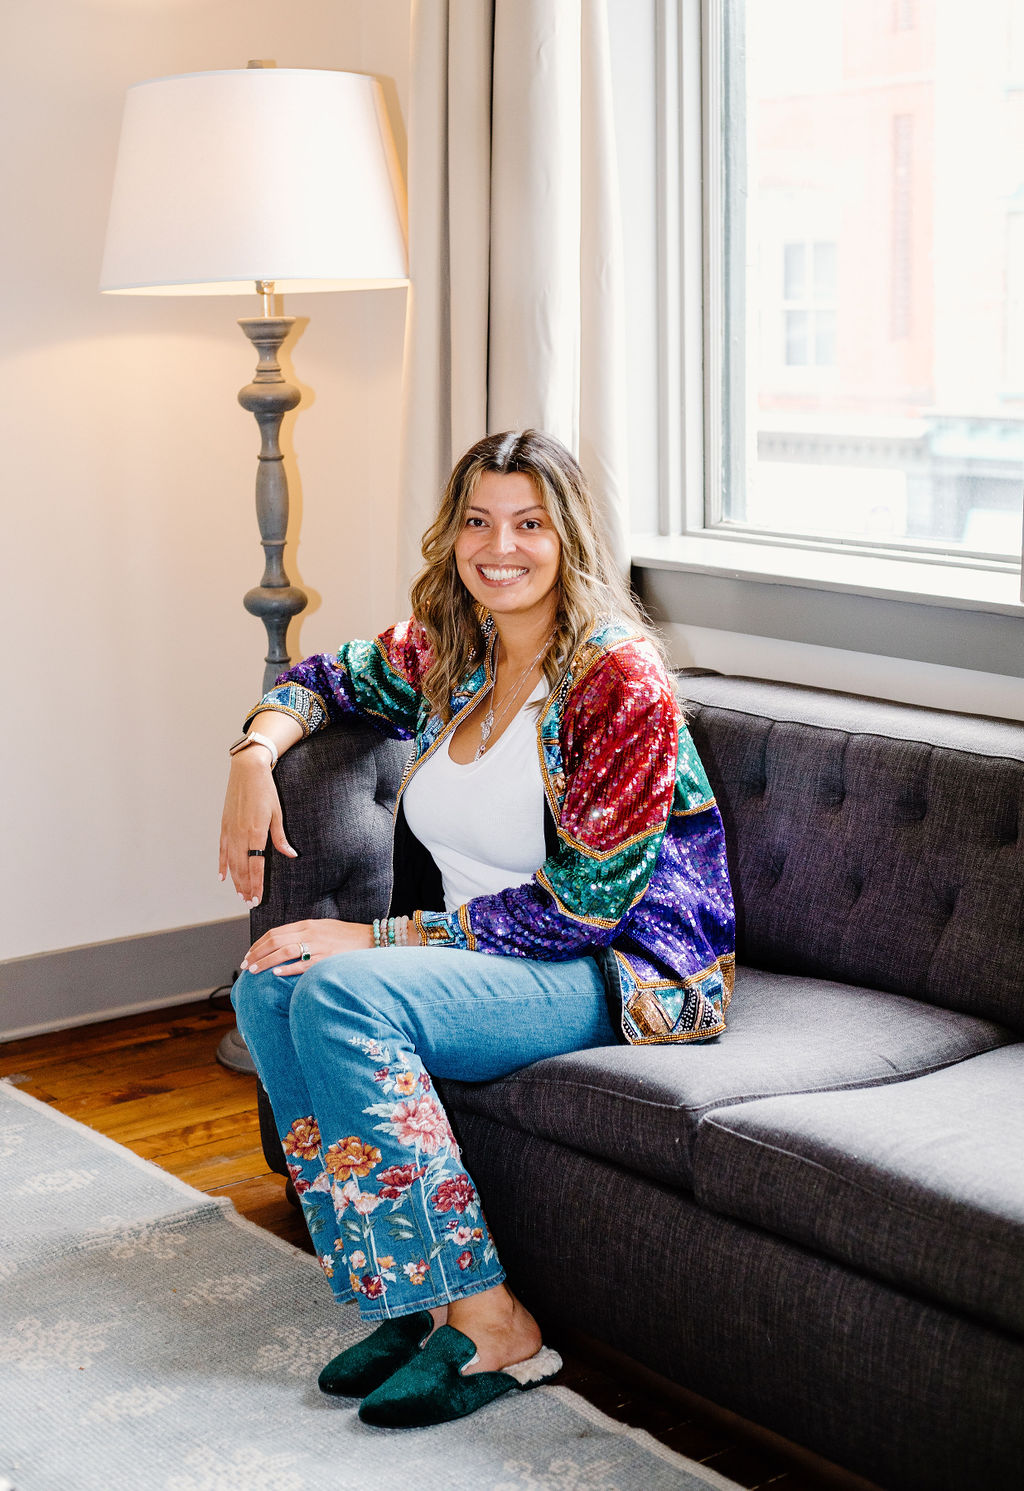 Gigi Bier wearing jeans, white t-shirt and a sequin jacket seating on a sofa smiling.